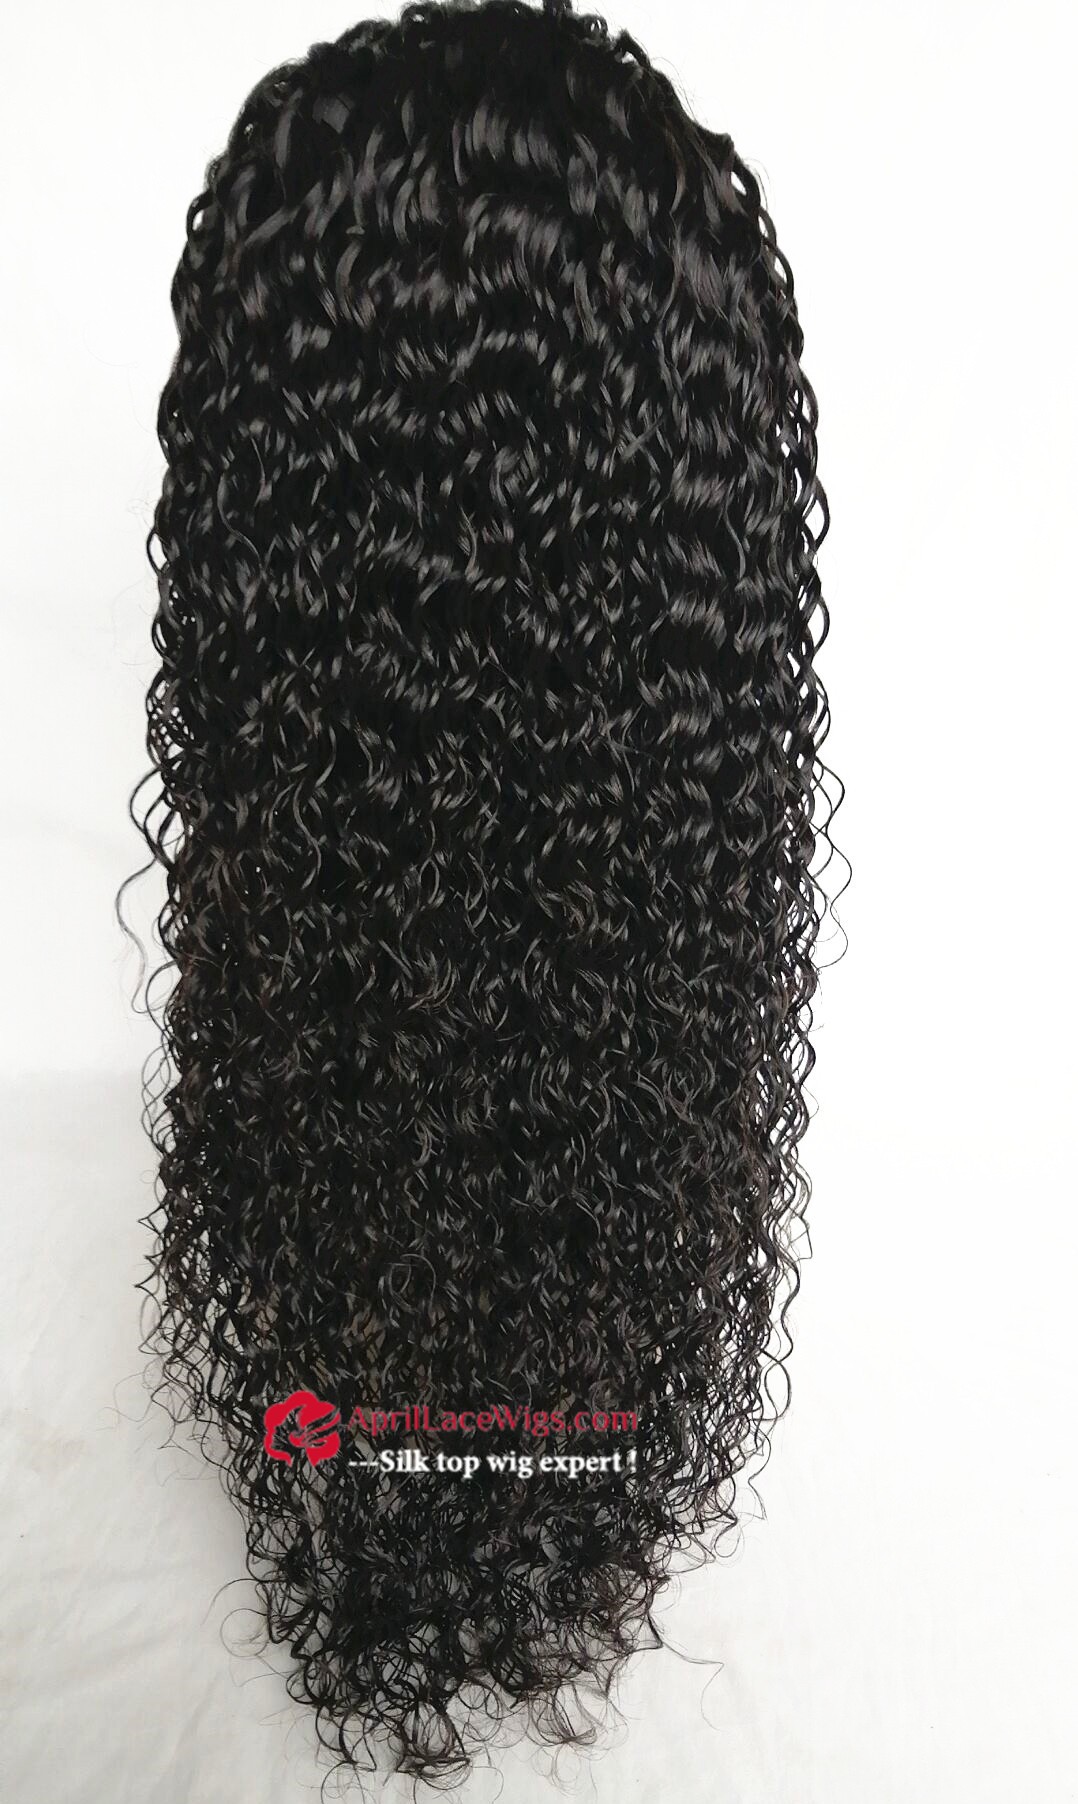 wet deep curly lace front wig, silk top lace front wig, curly lace front wig